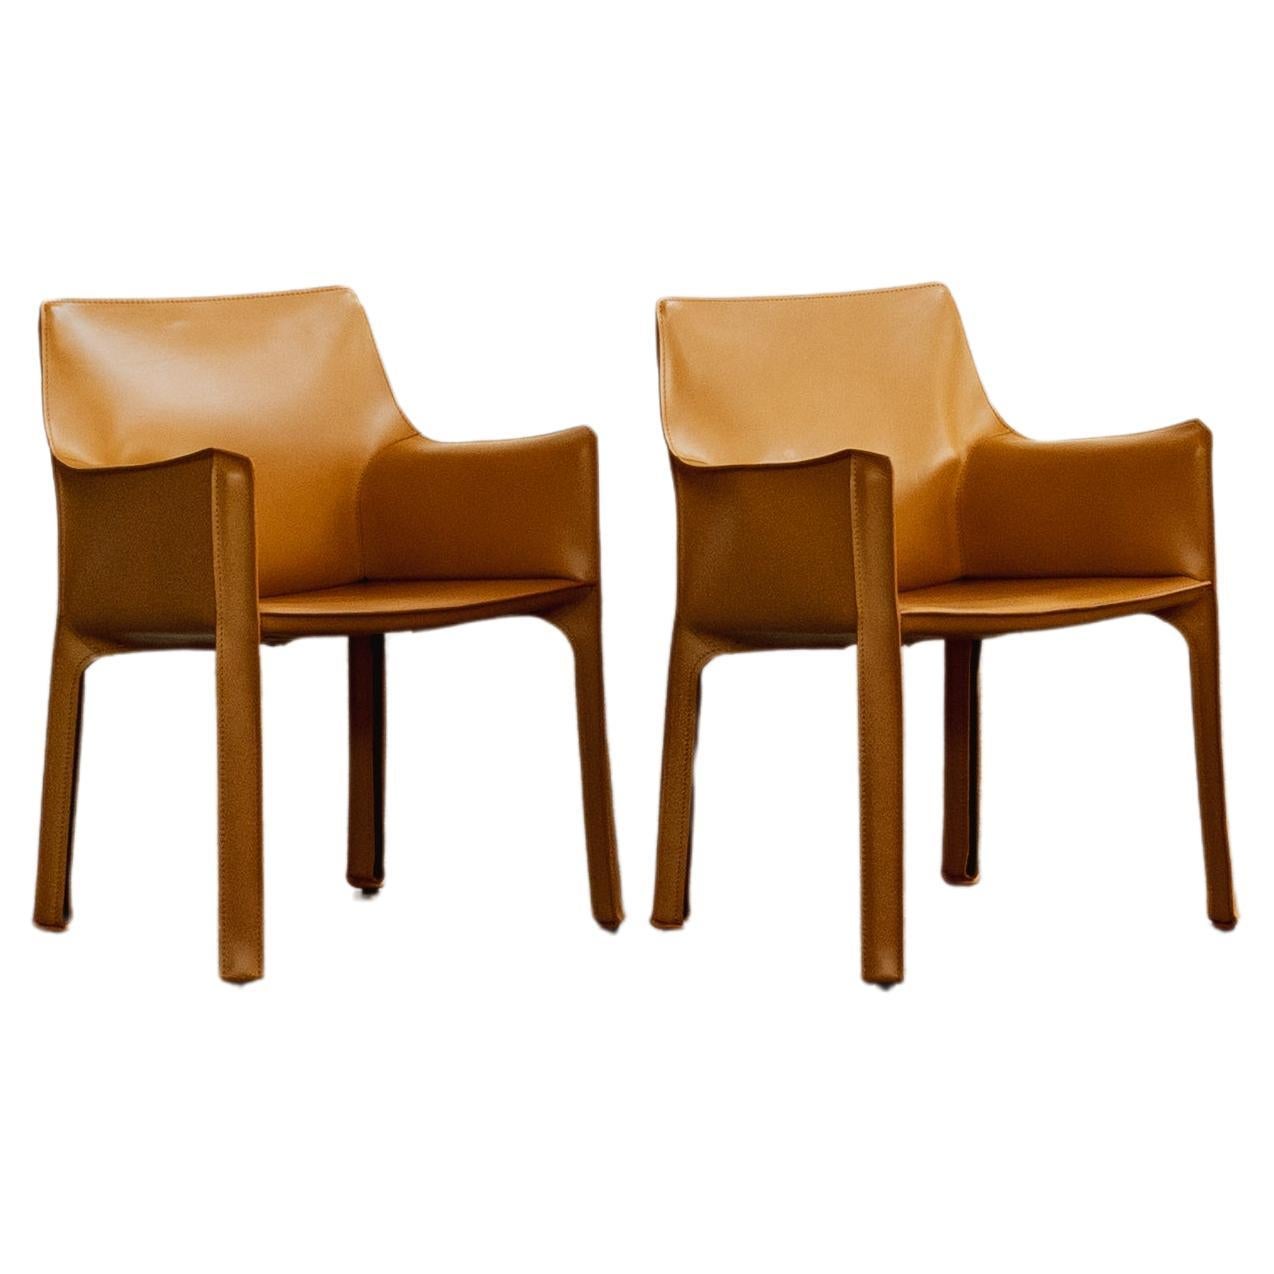 Mario Bellini "CAB 413" Chairs for Cassina in Yellow, 1977, Set of 2 For Sale